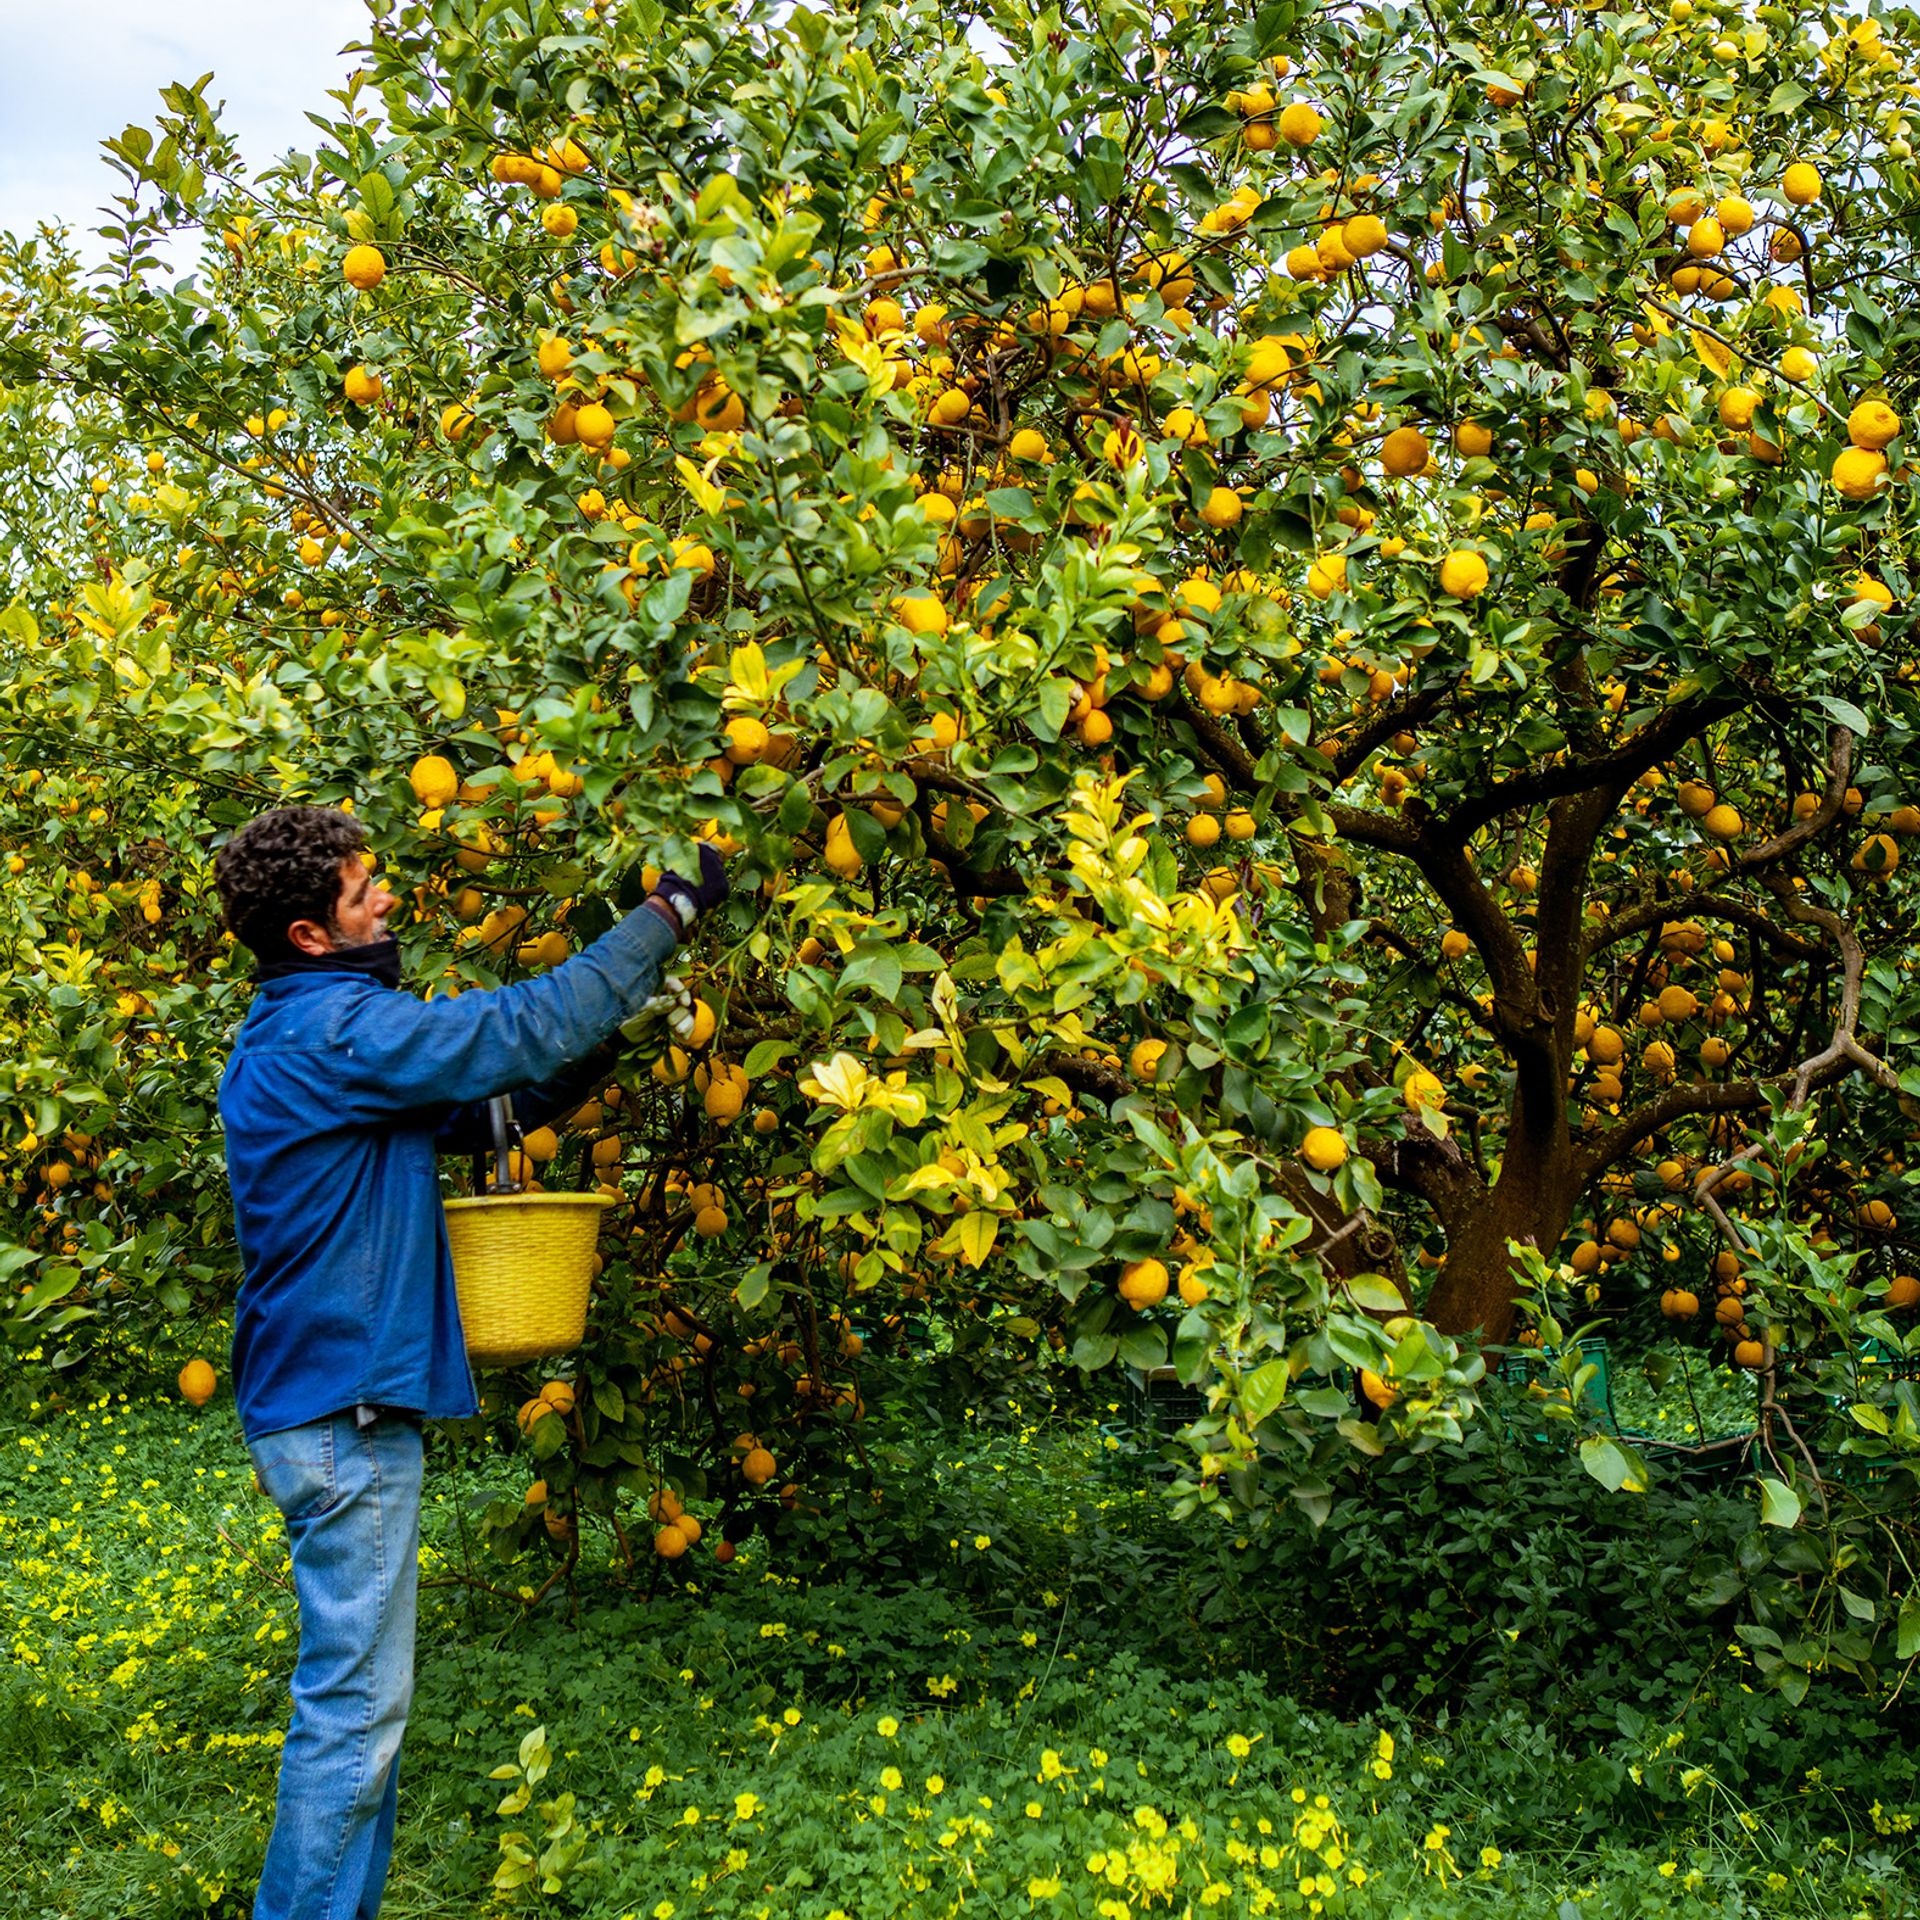 Image of a lemon farmer from Italy harvesting produce for labeling with the GGN label